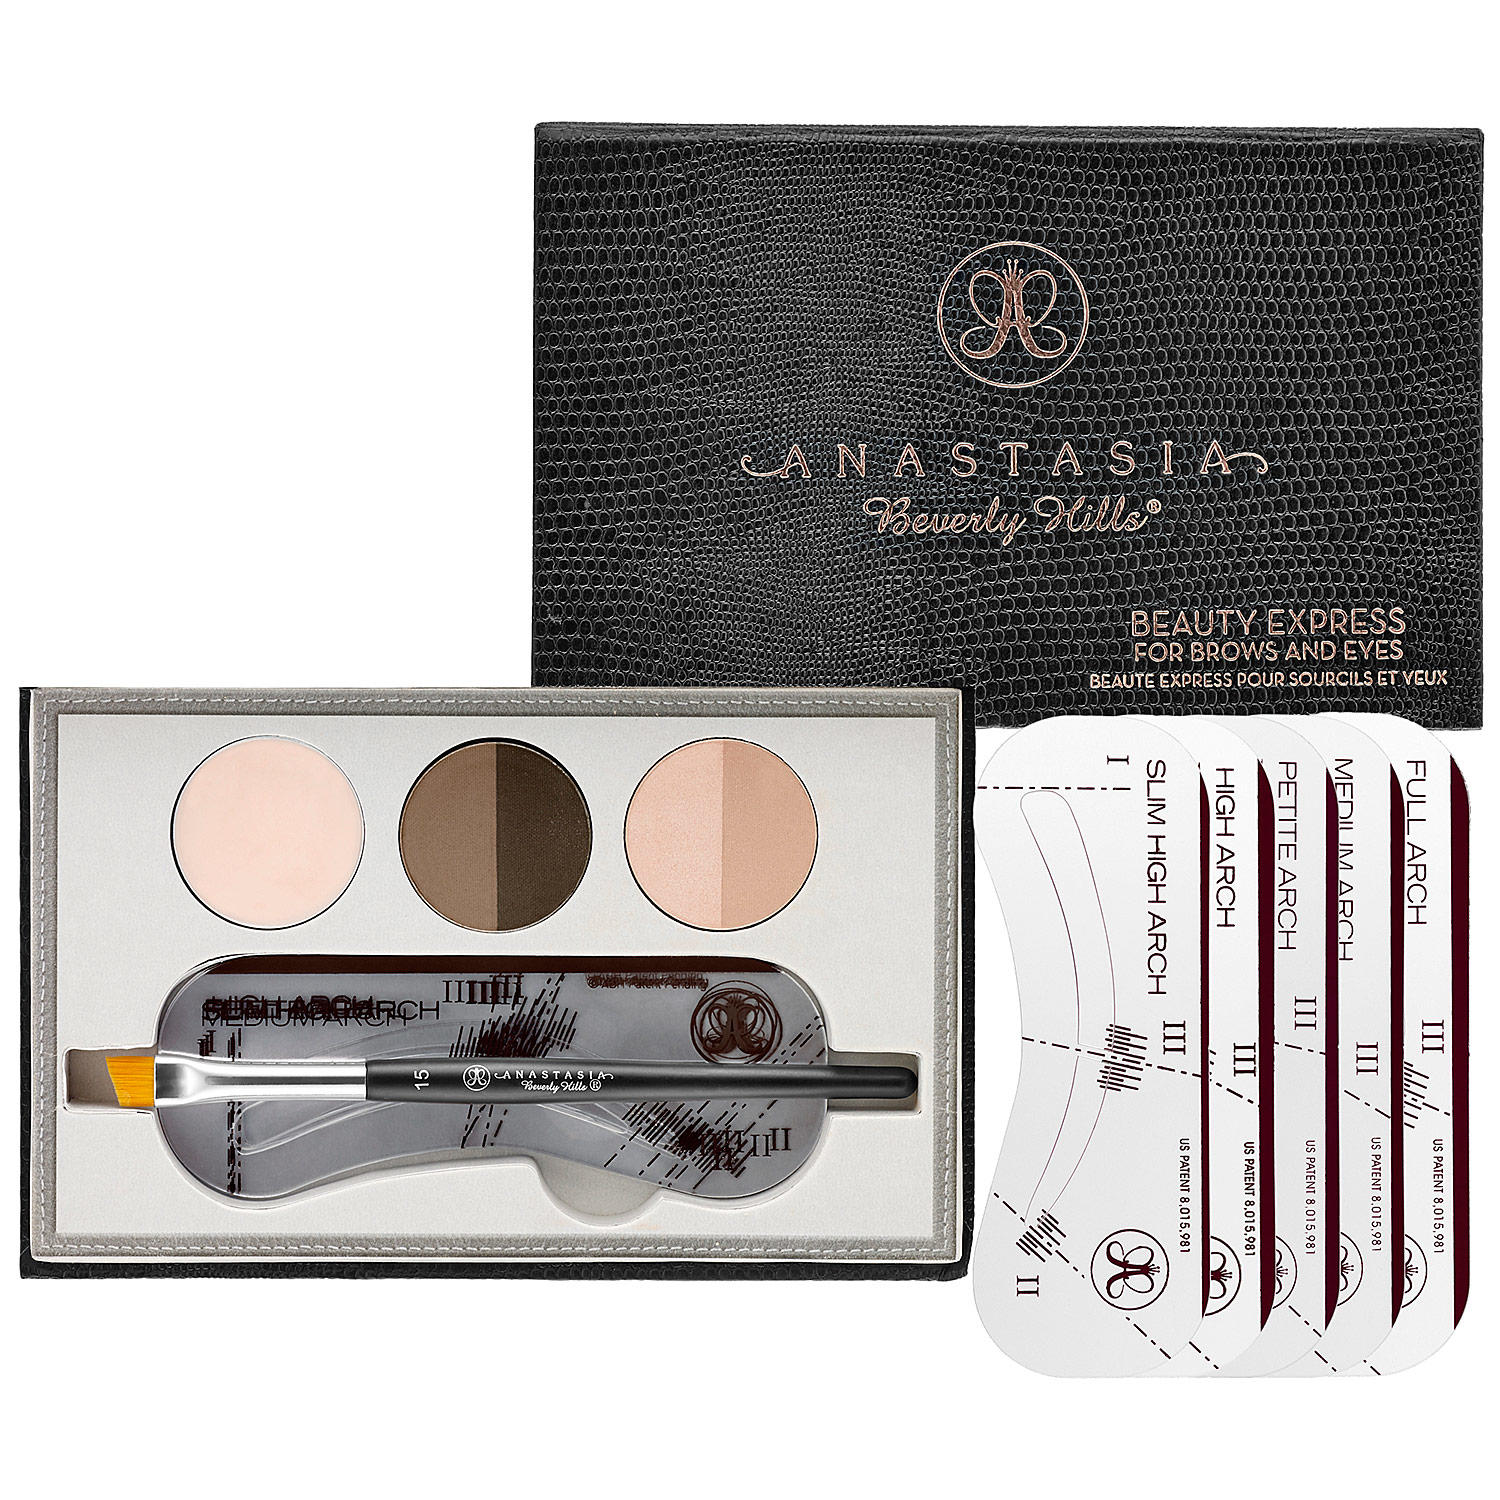 Anastasia Beauty Express For Brows & Eyes Brunette 